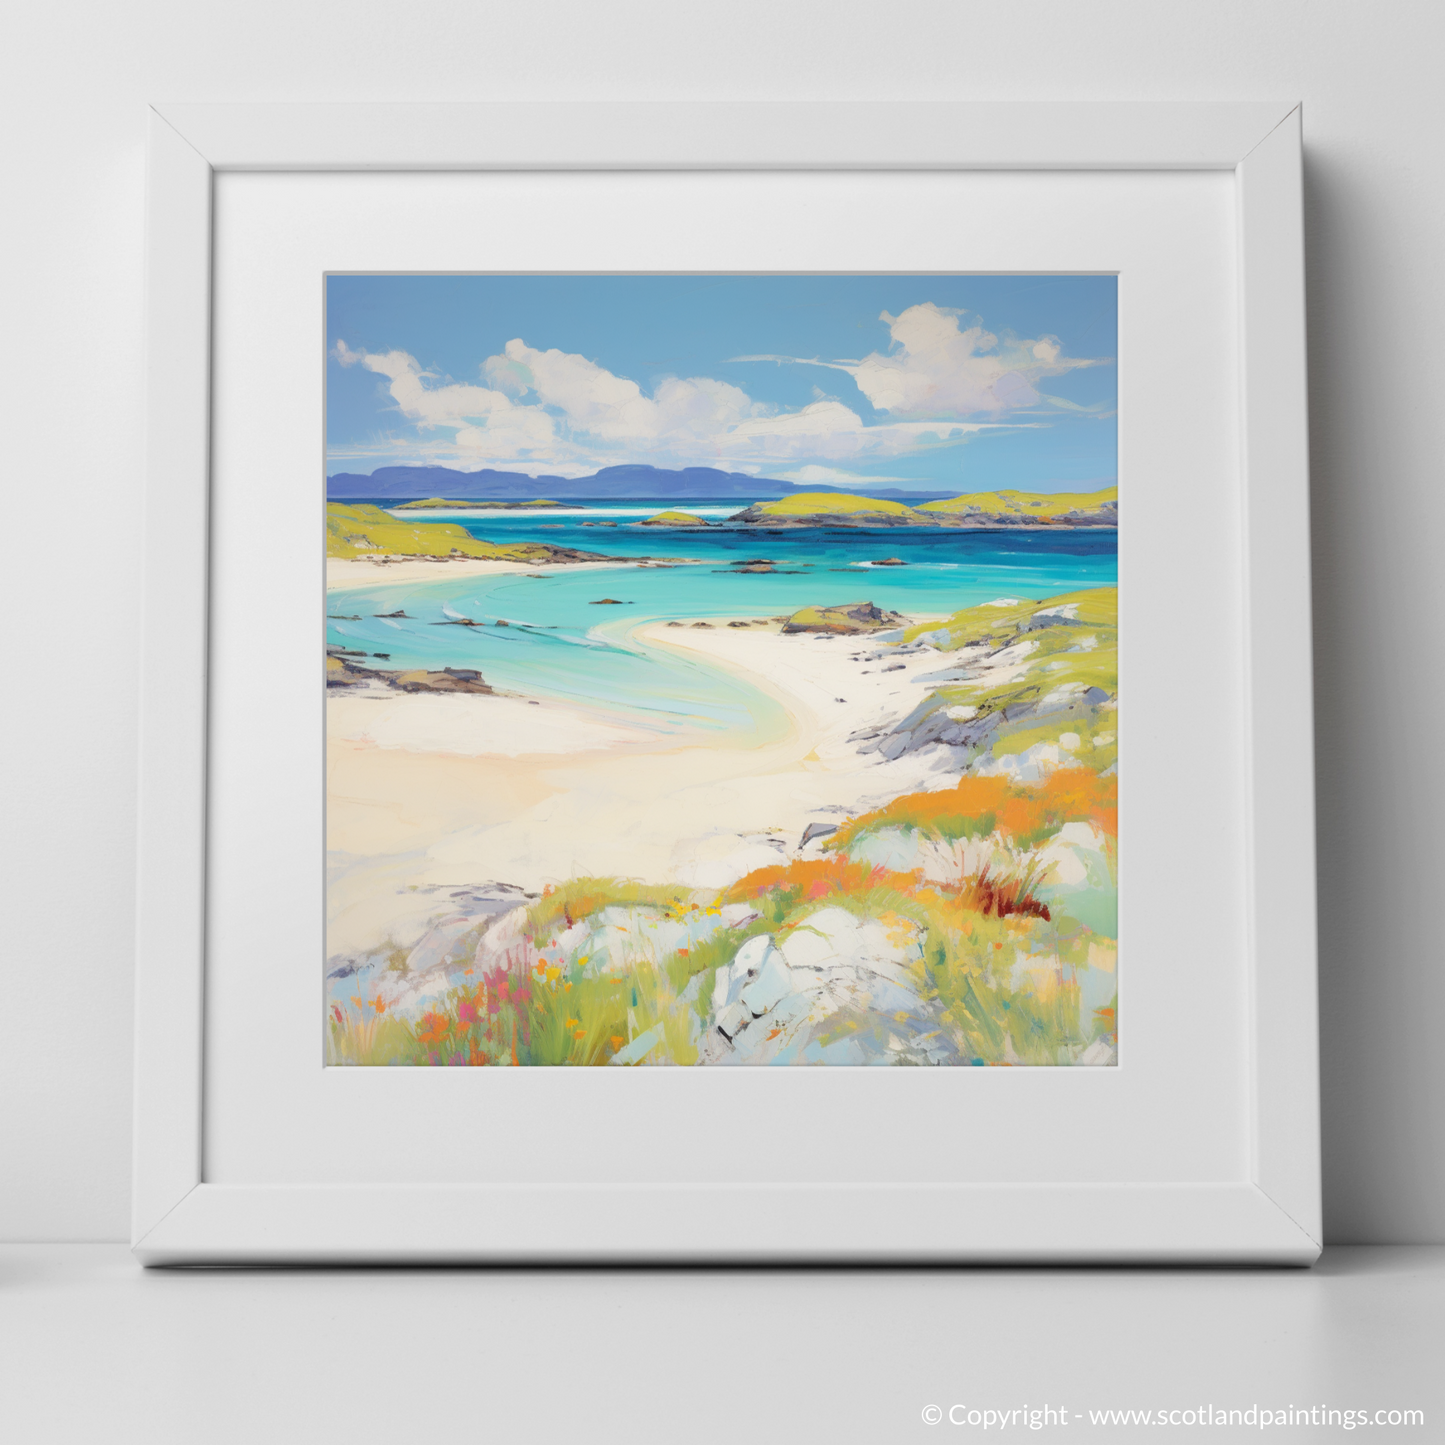 Art Print of Mellon Udrigle Beach, Wester Ross in summer with a white frame